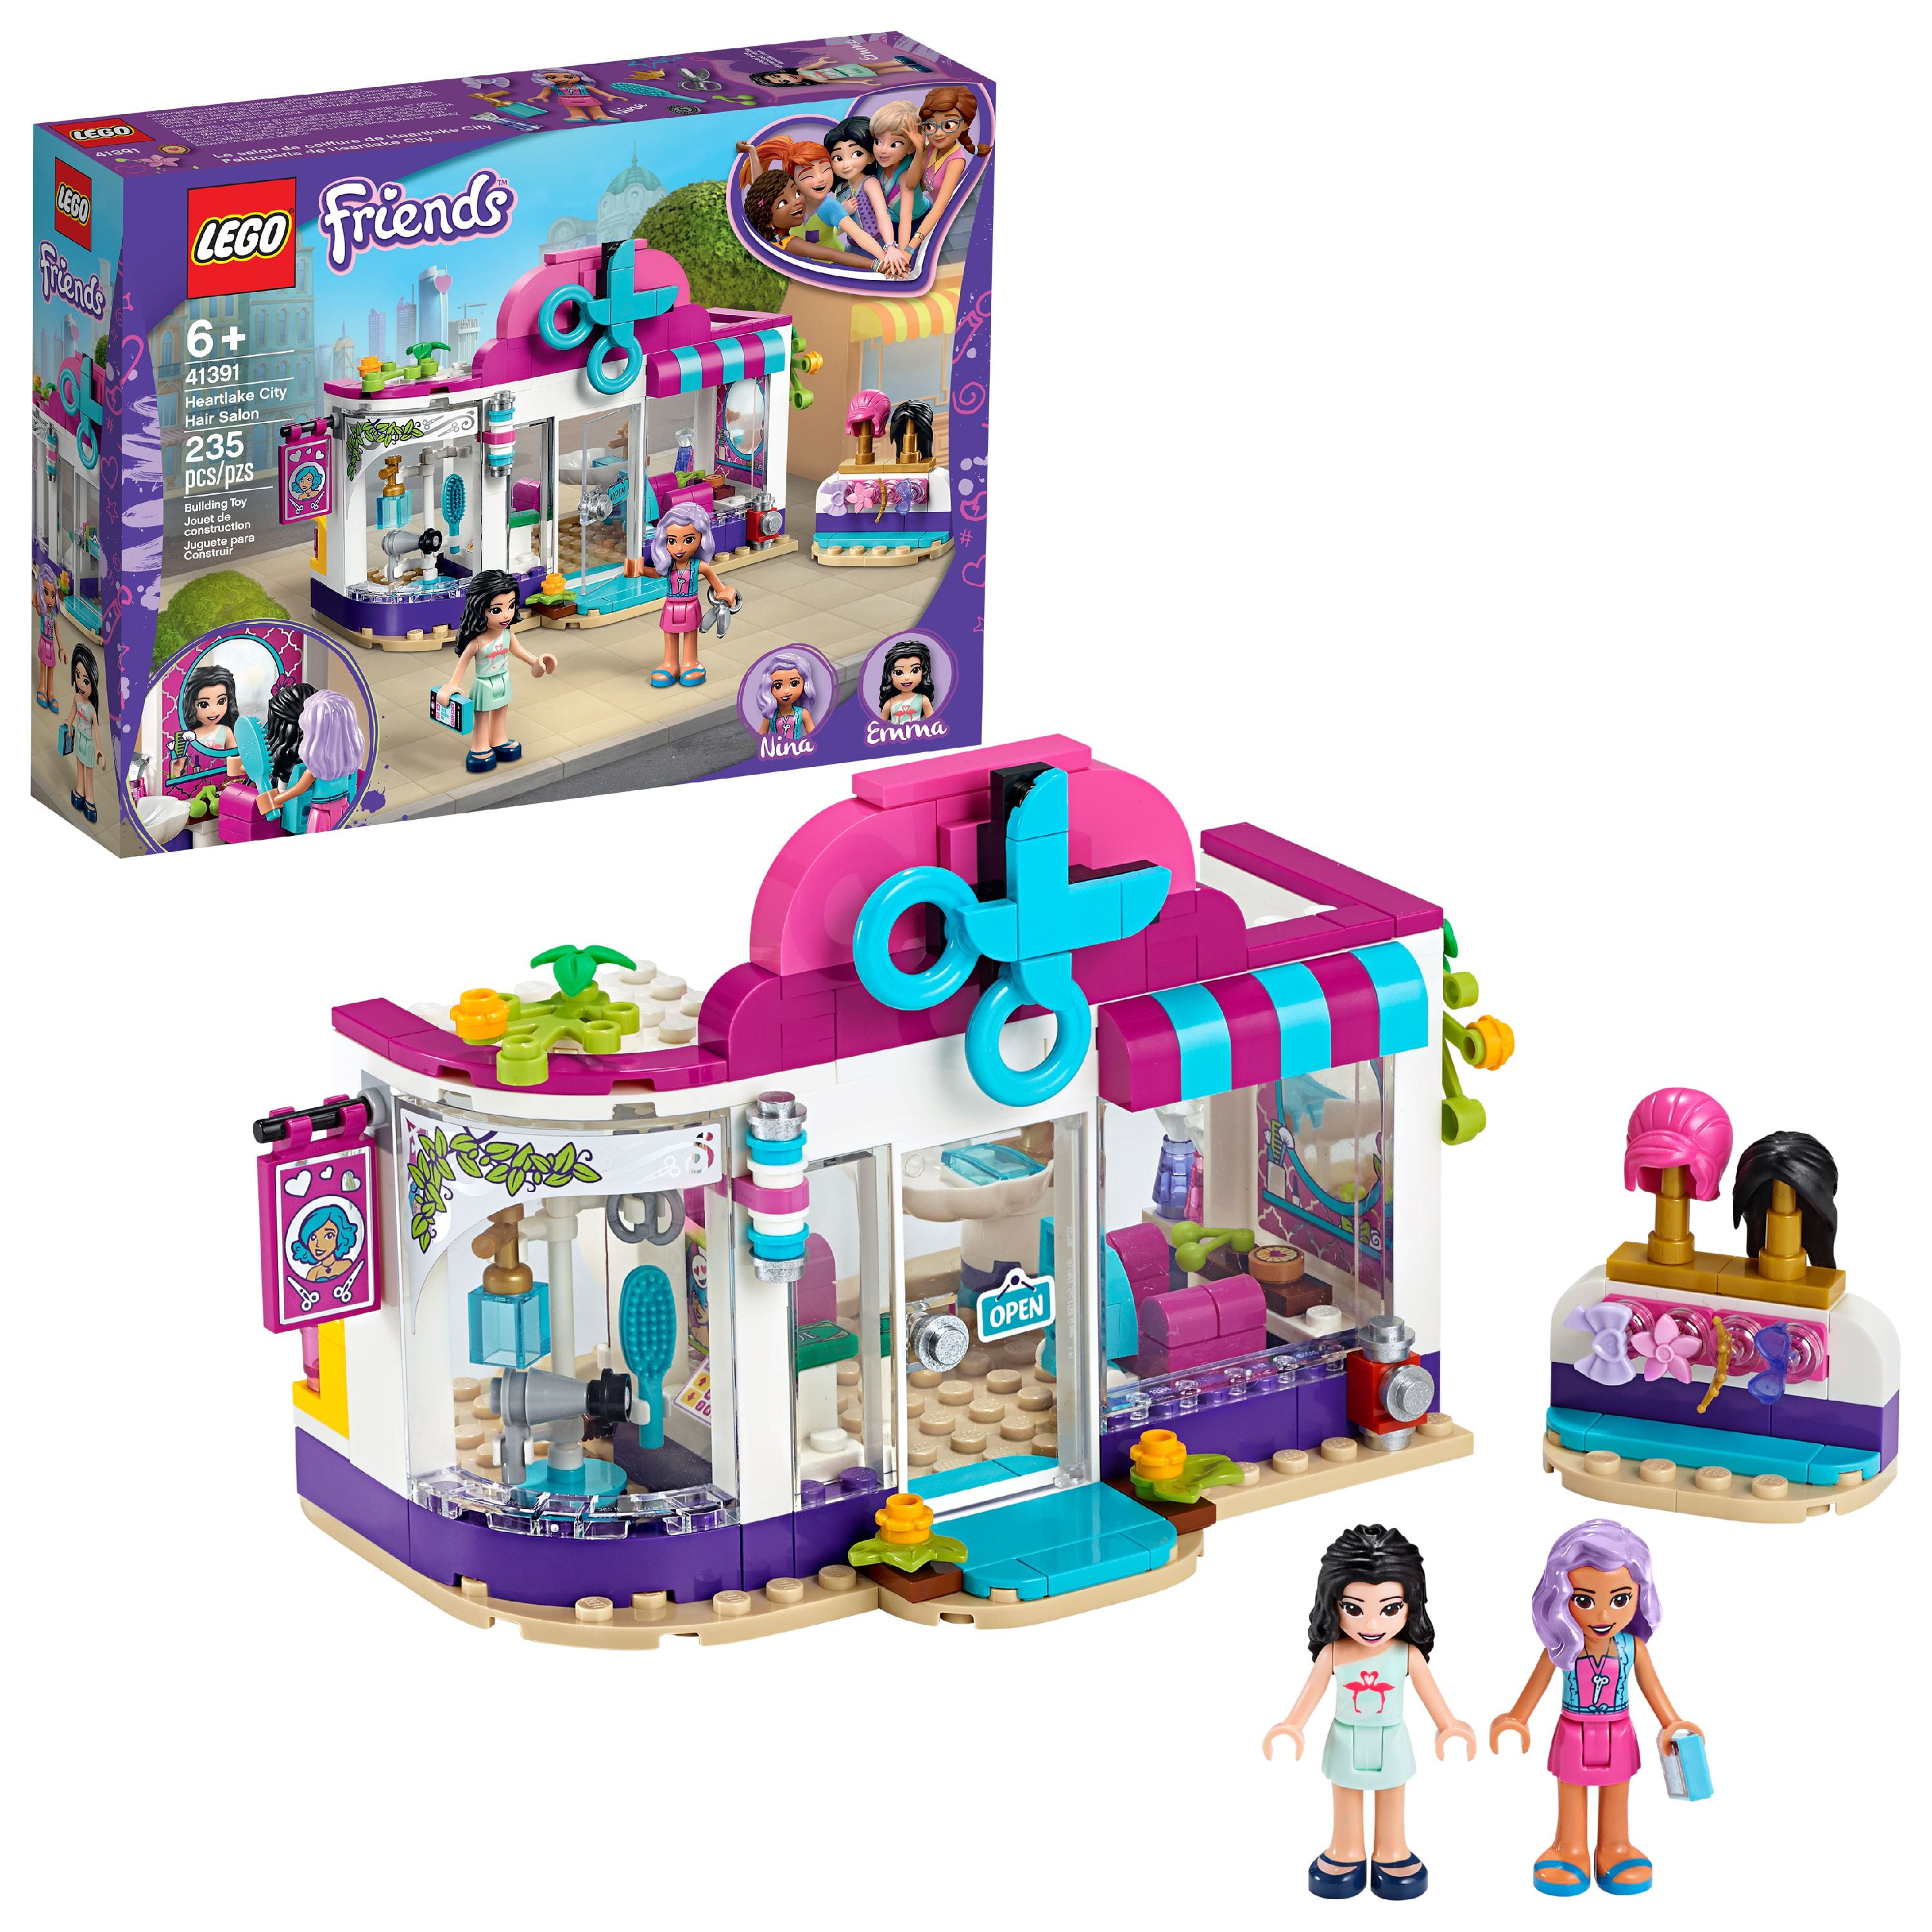 LEGO Friends Heartlake City Hospital 41394 Best Doctor Toy Building Kit Featuring LEGO Friends Character Emma New 2020 379 Pieces